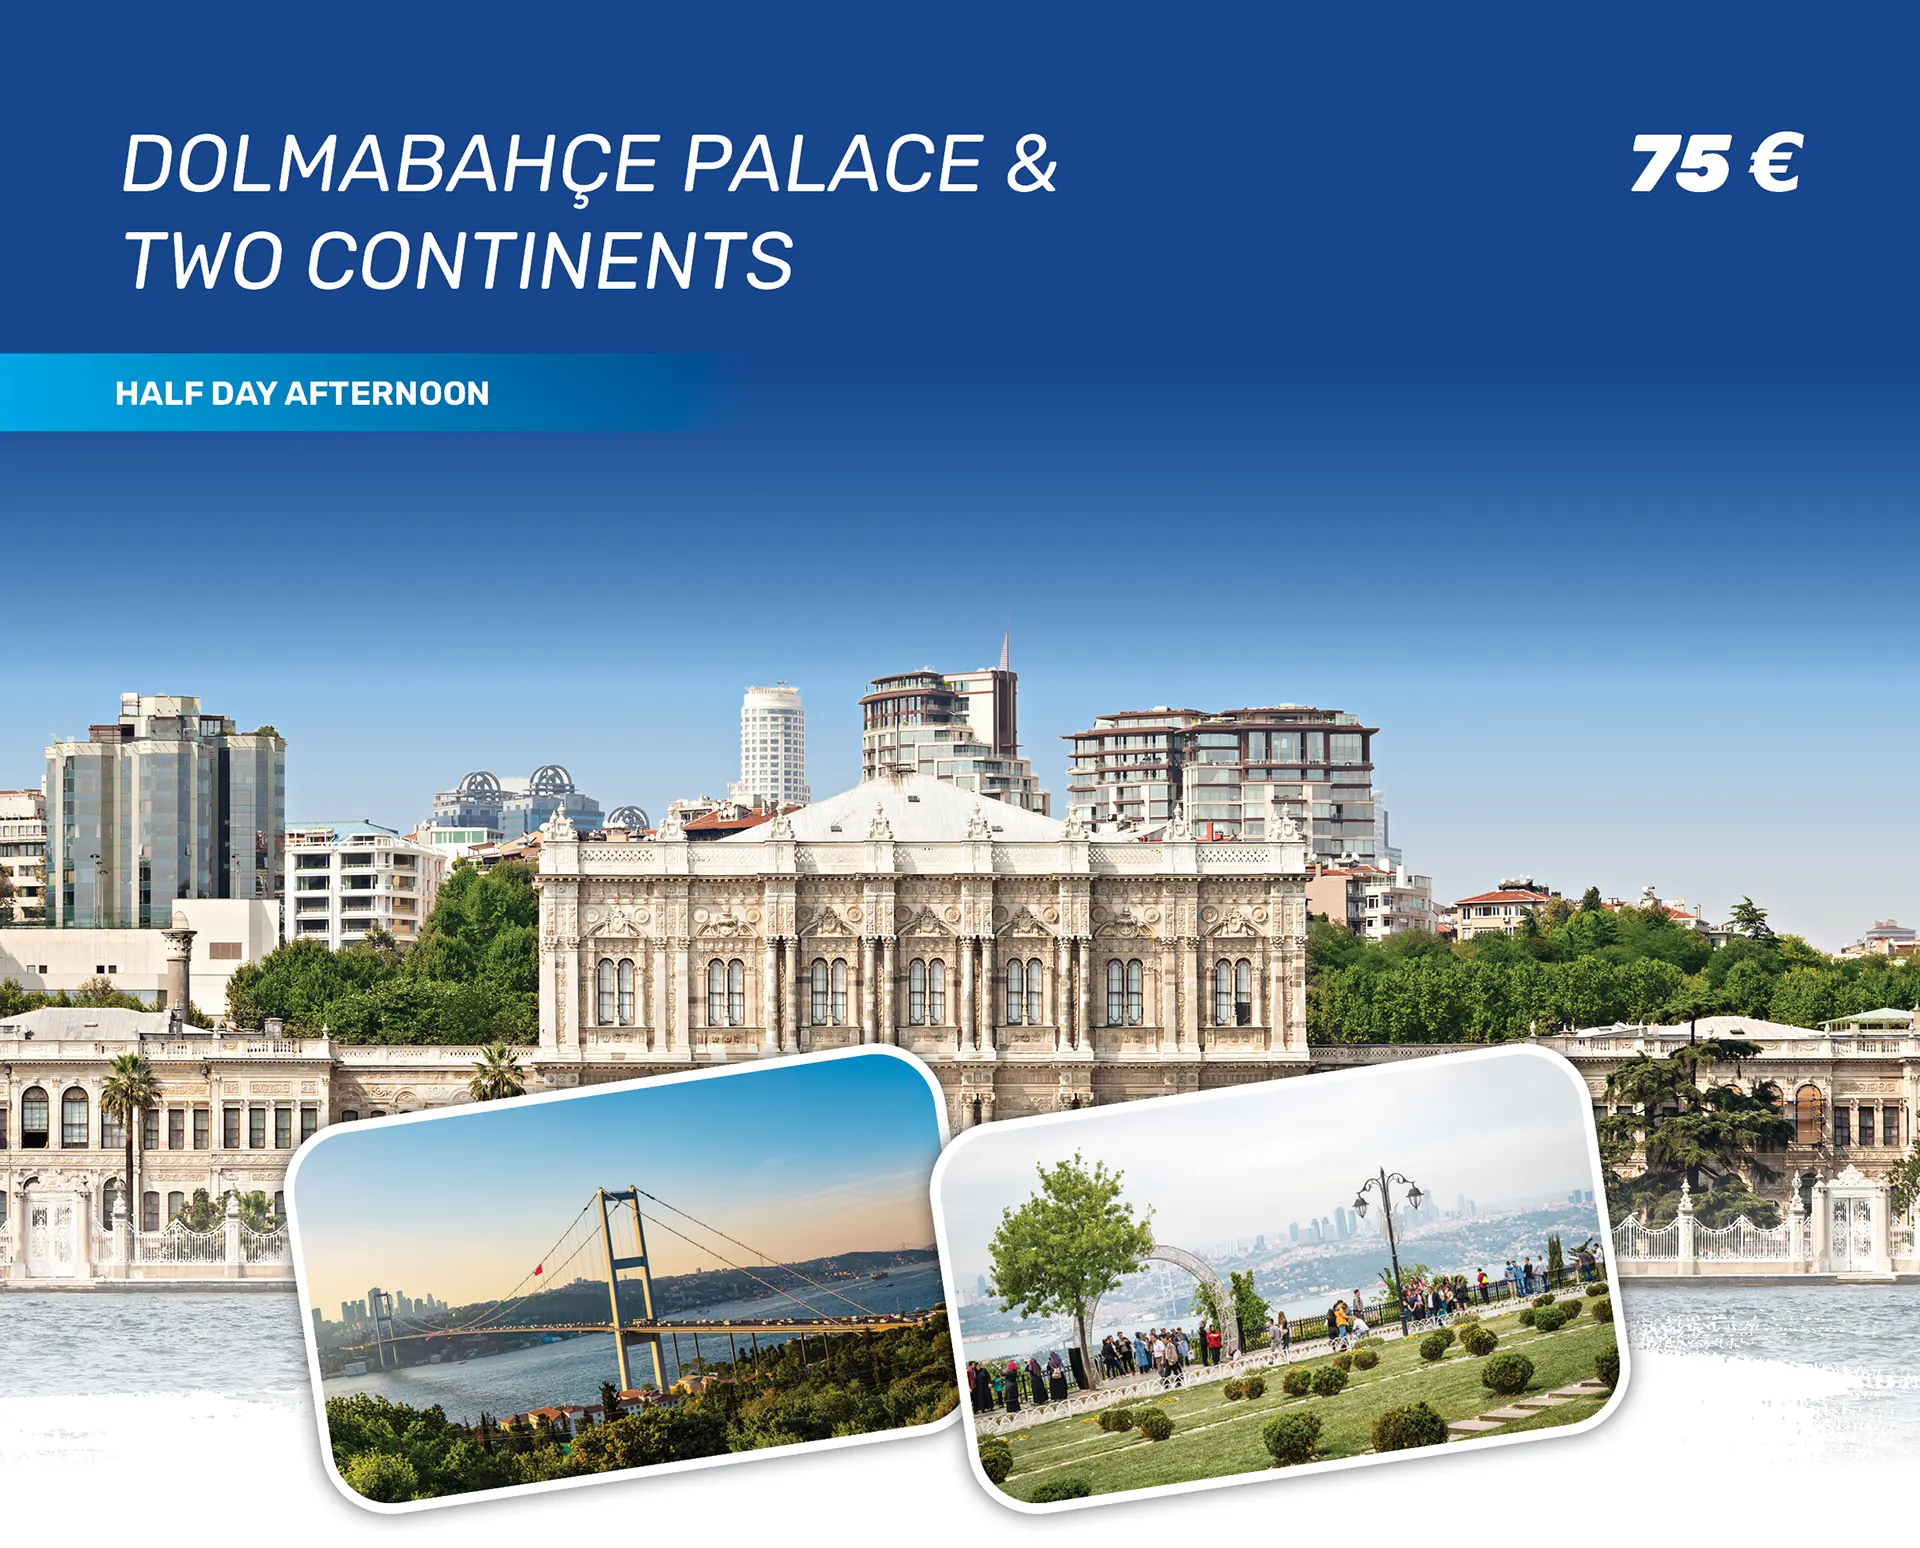 Dolmabahe Palace & Two Continents